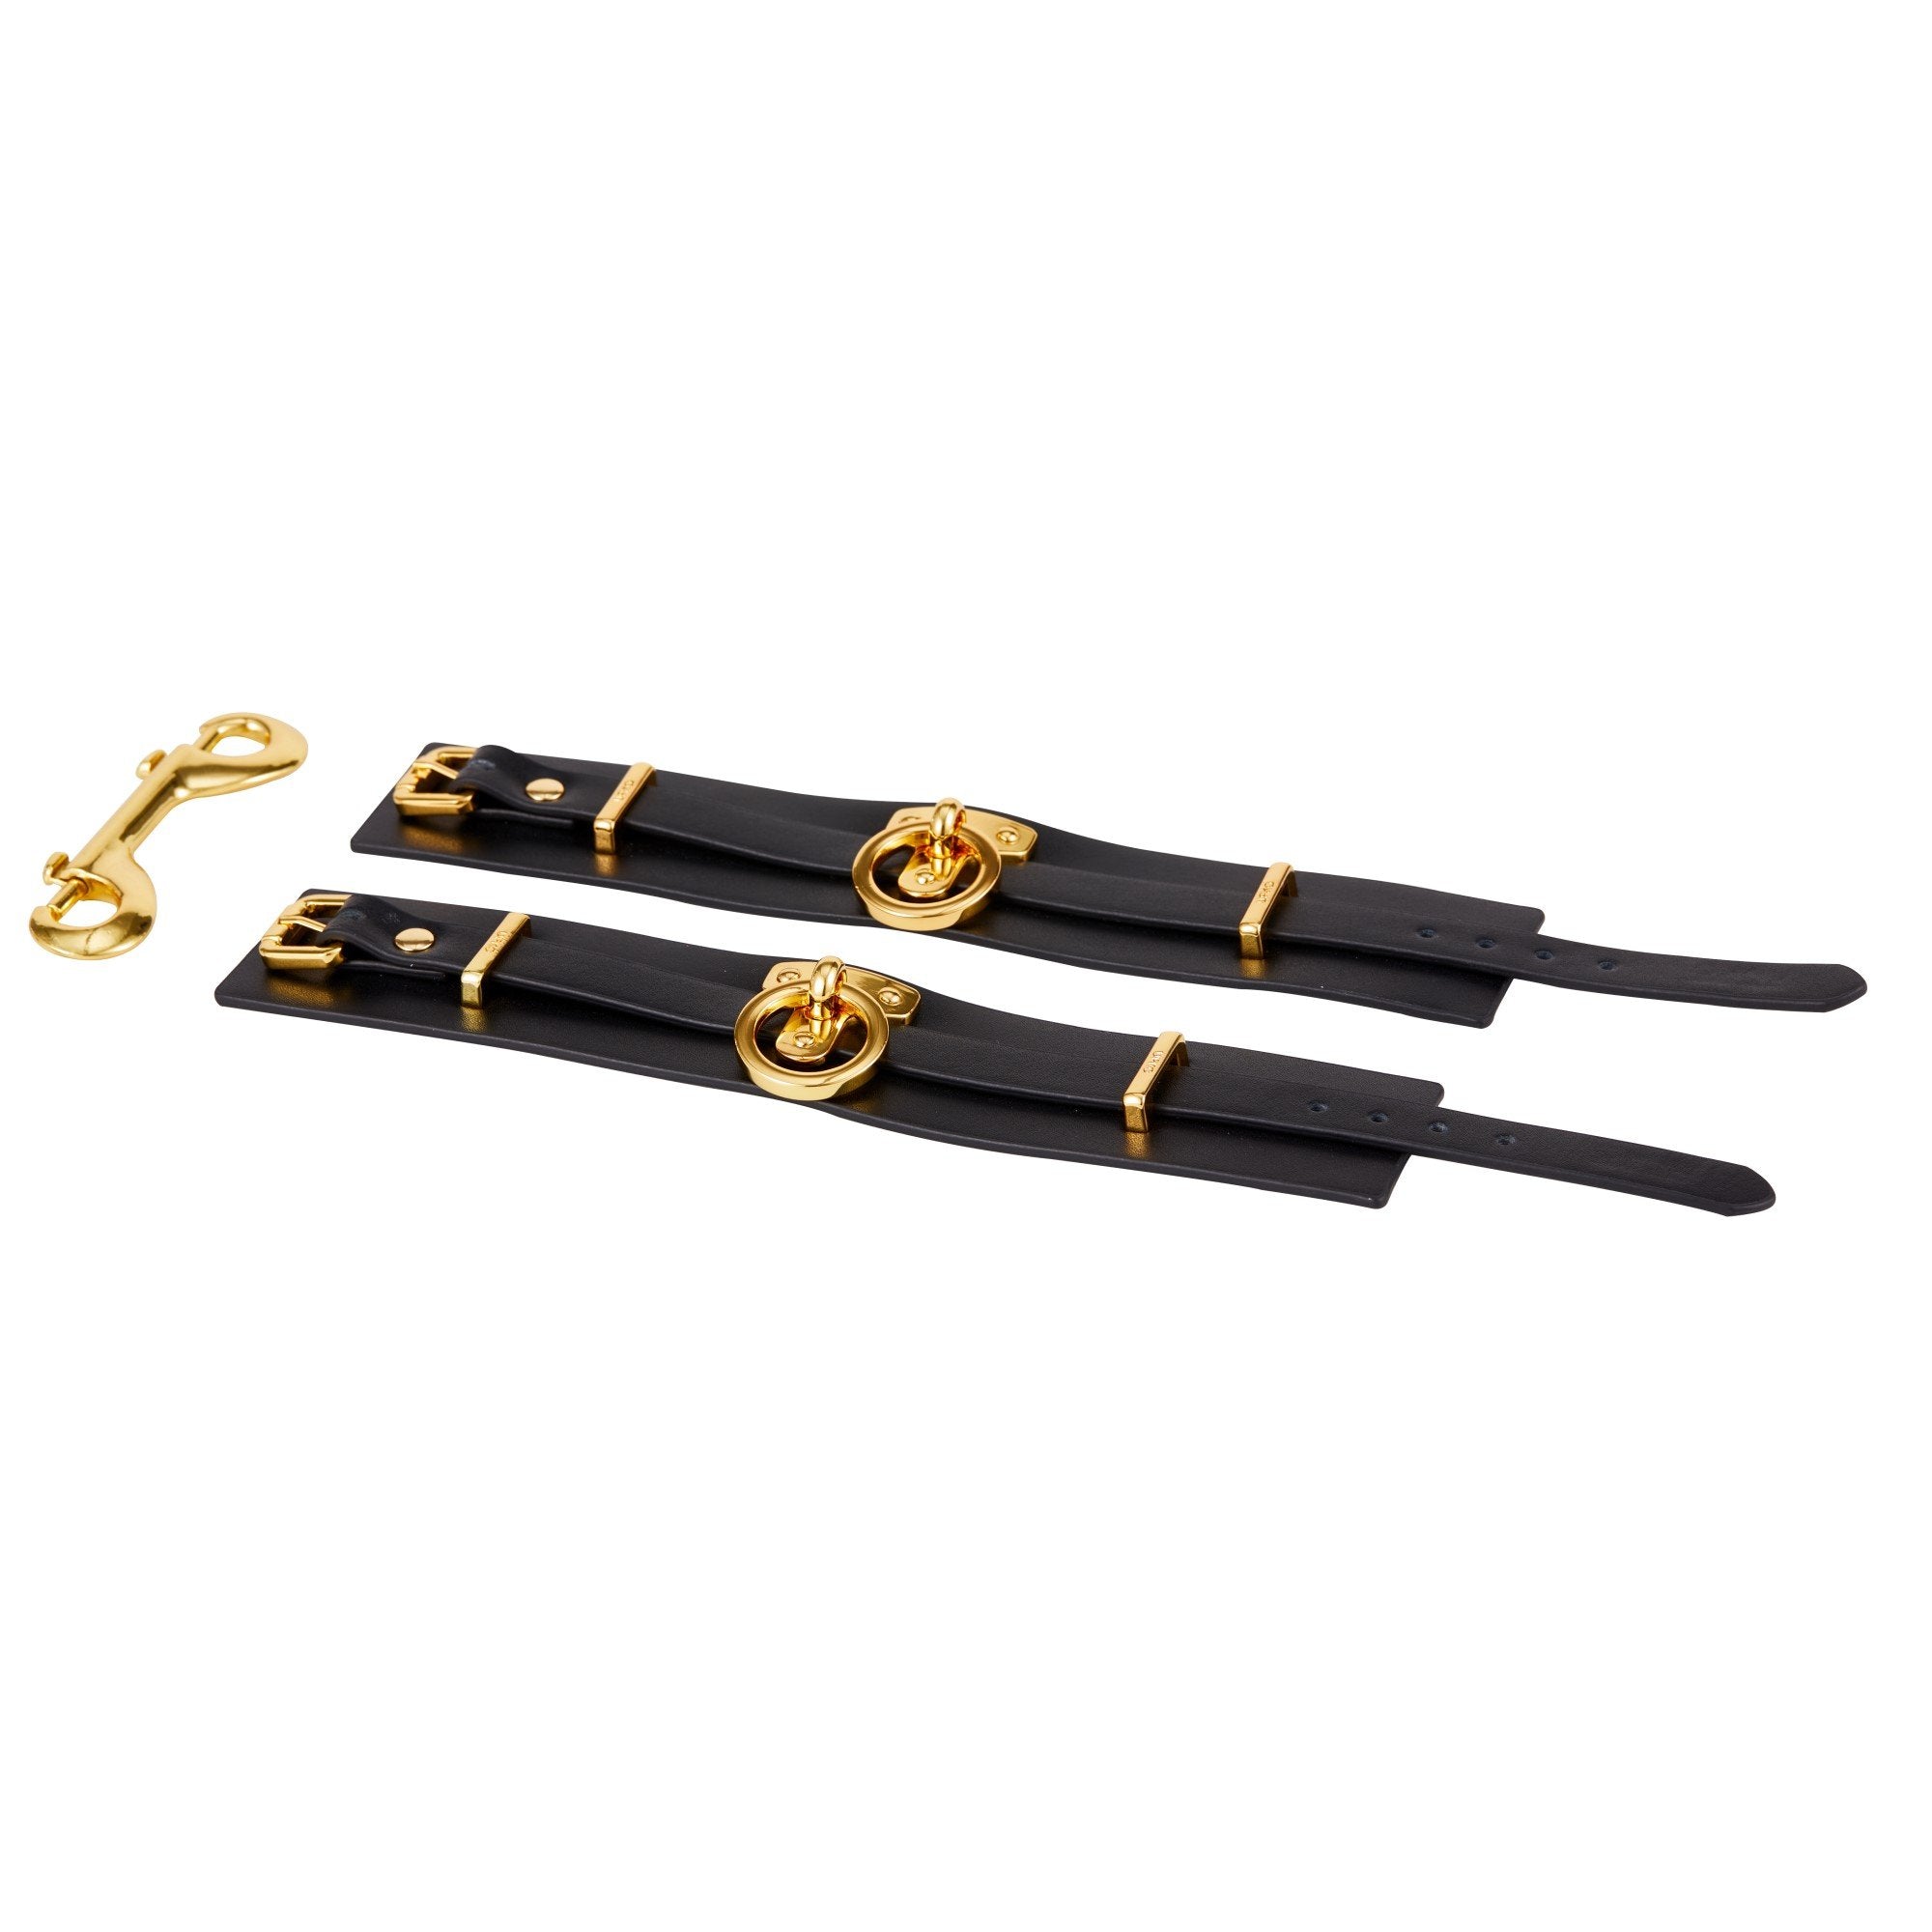 Luxury Italian Leather Spreader Bar, Handcuffs, and Ankle Cuffs Set by UPKO